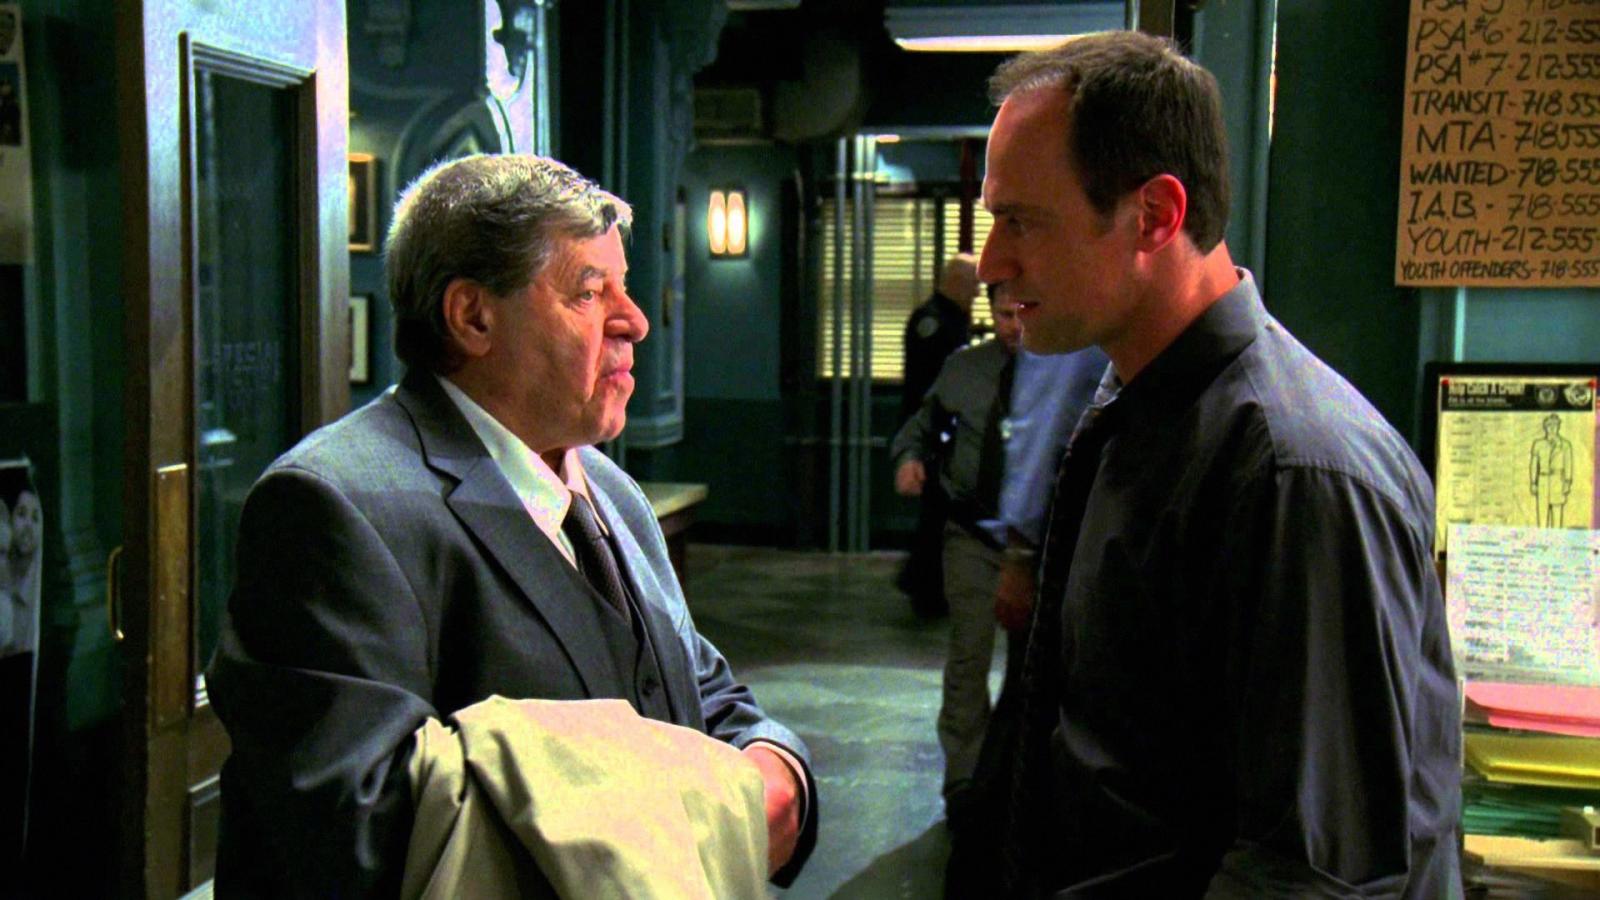 7 Big-Name Celebs You Totally Forgot Guest-Starred in SVU - image 7